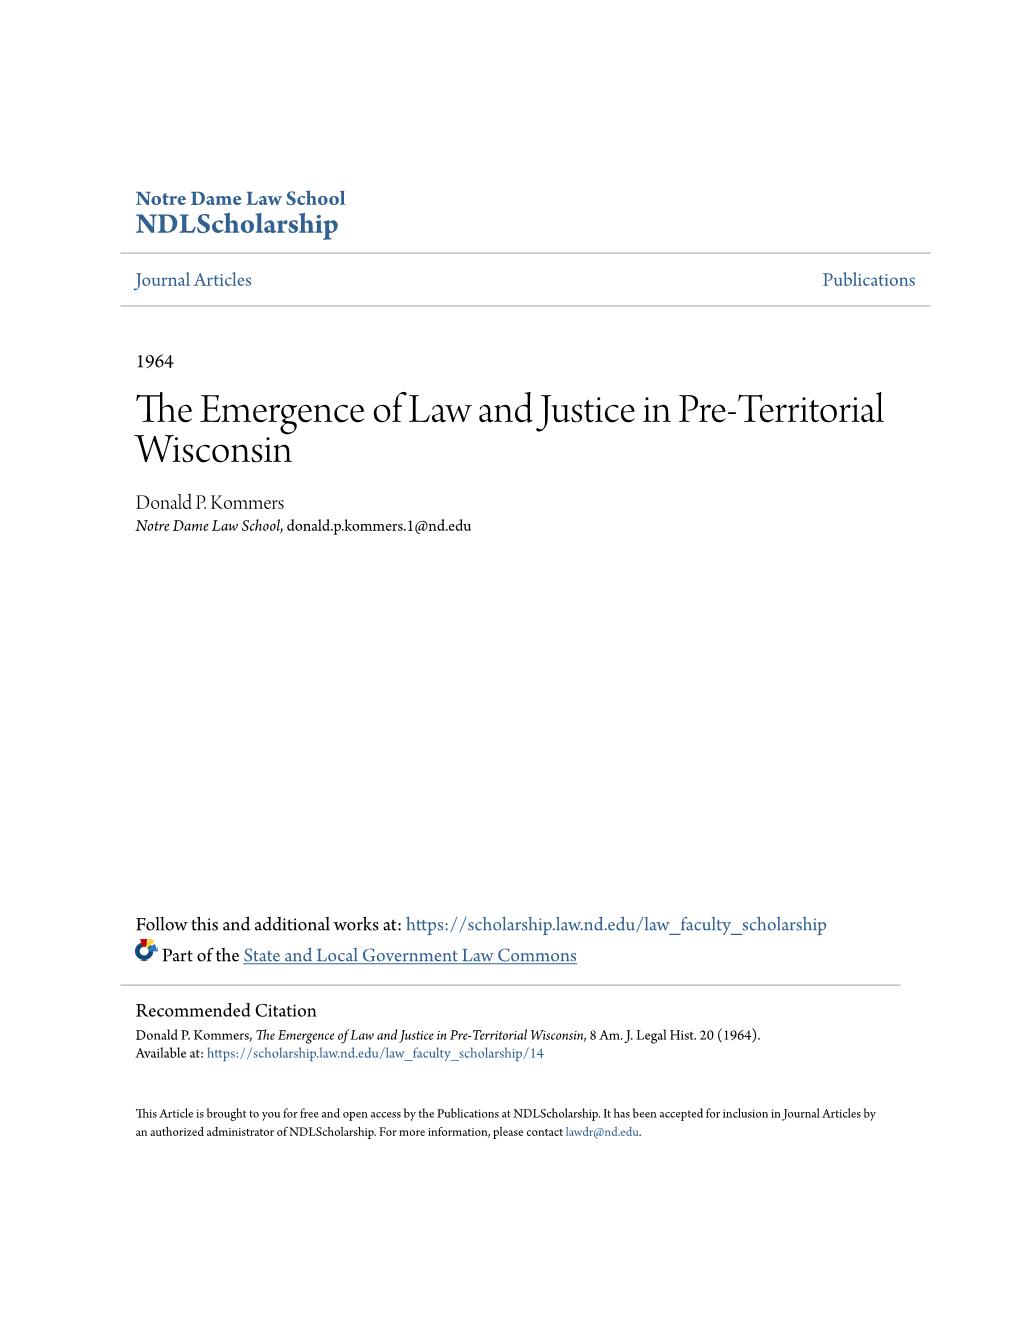 The Emergence of Law and Justice in Pre-Territorial Wisconsin, 8 Am